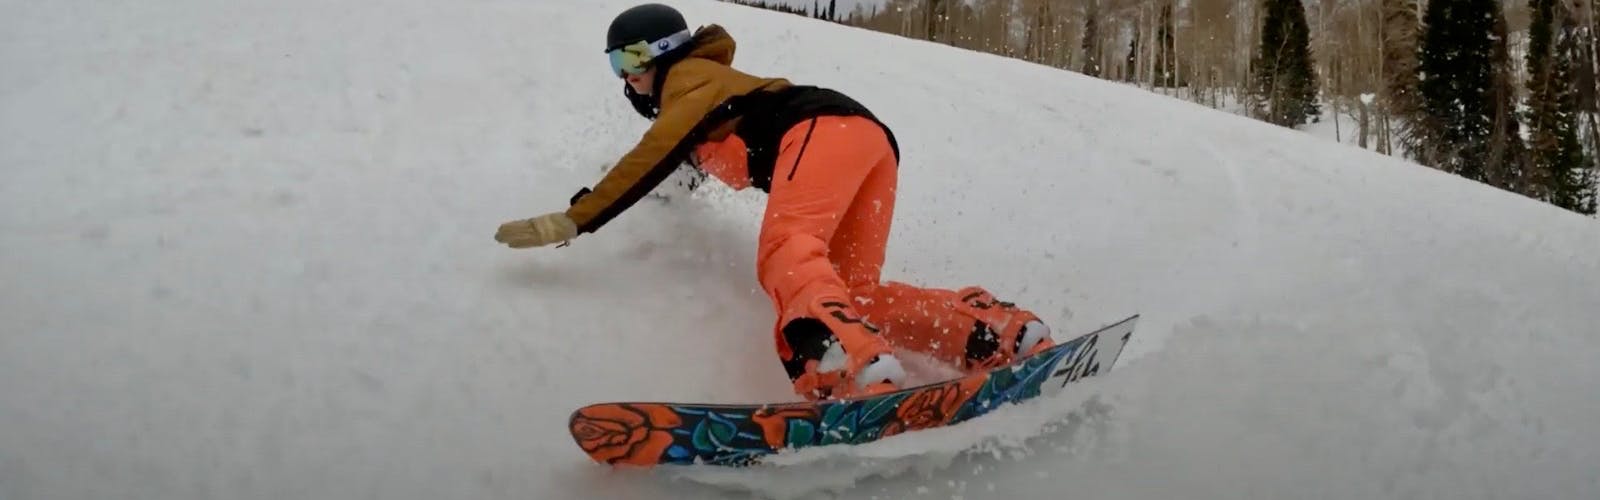 Snowboard Expert Sydney Johnson carving with the Lib Tech Dynamiss snowboard on a groomed run